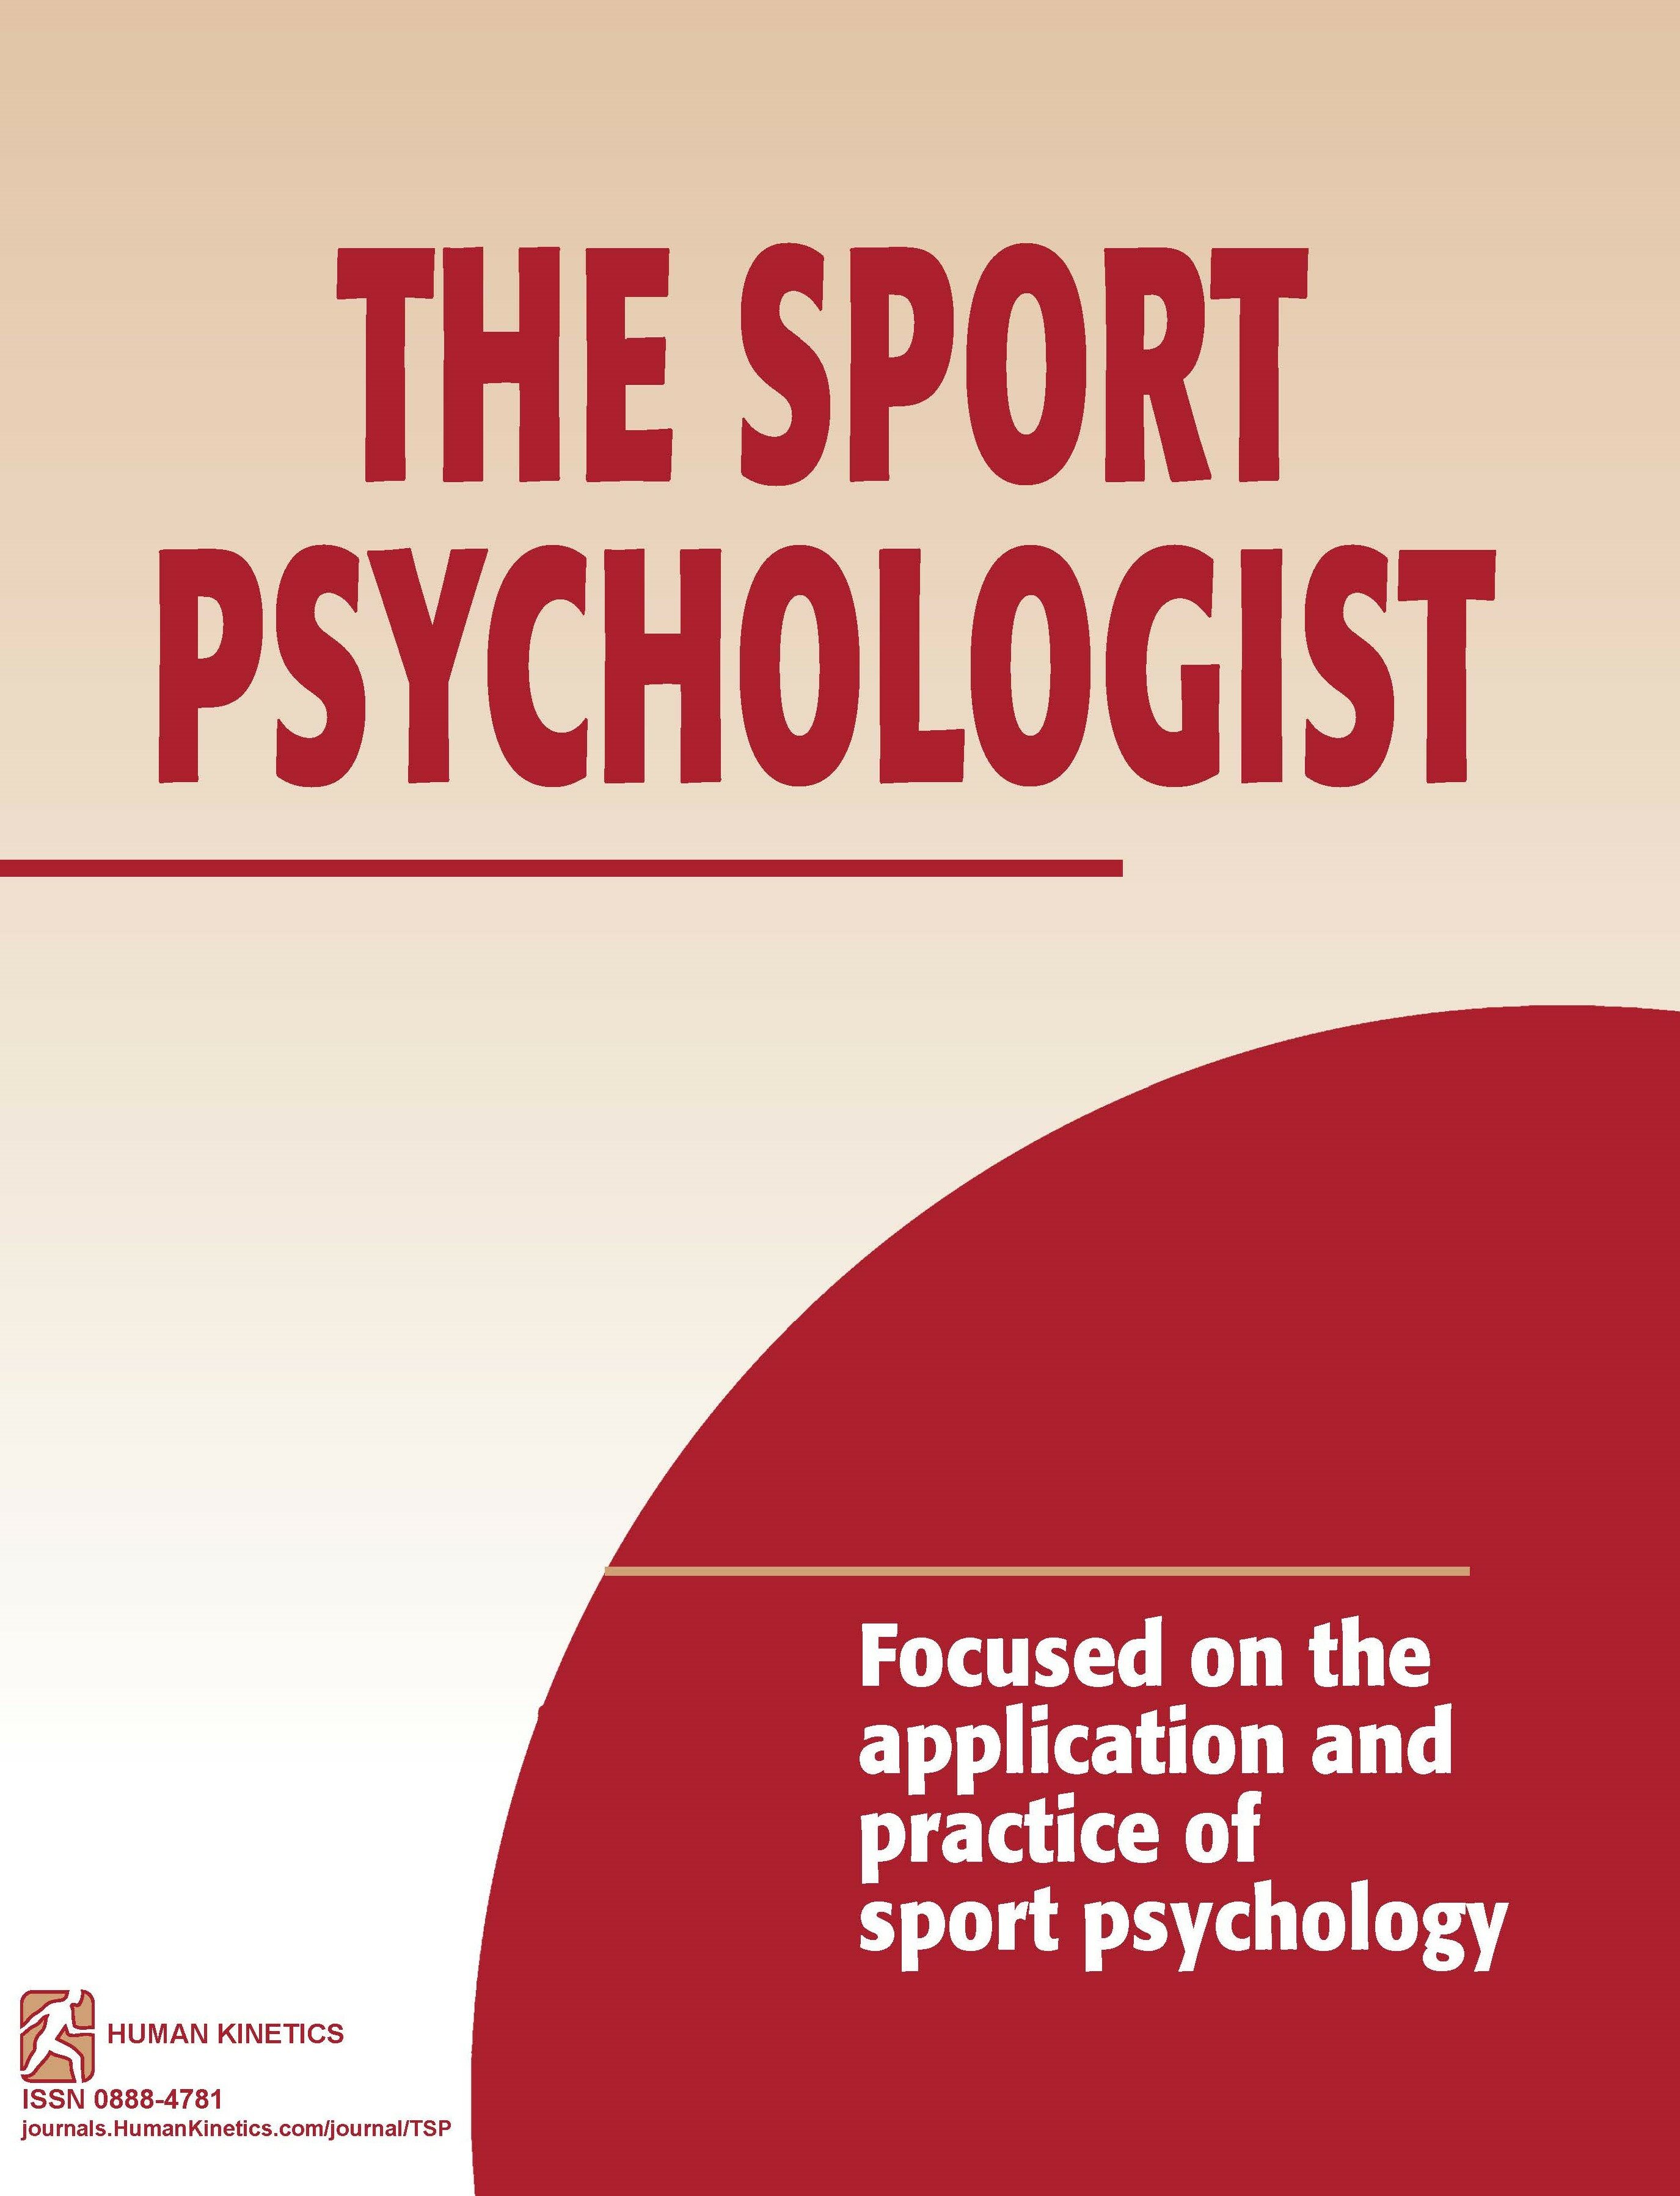 “I Realized It Was a Different Kind of Culture to Other Sports”: An Exploration of Sport Psychology Service Provision and Delivery in Gaelic Games